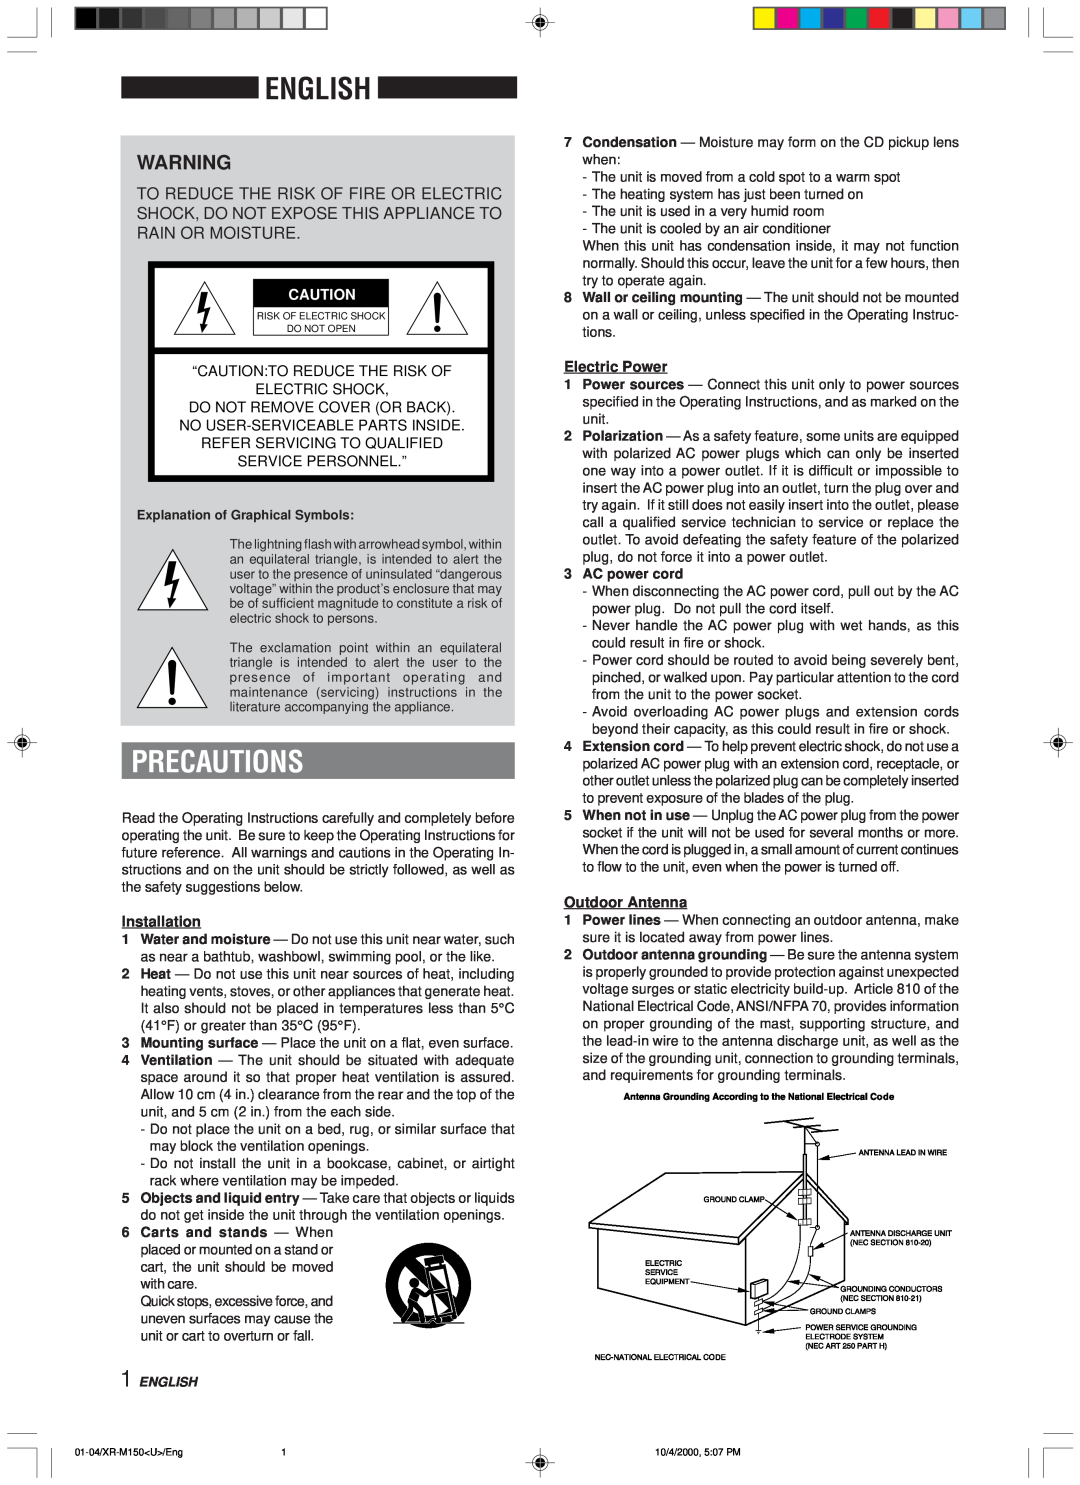 Aiwa XR-M150 Precautions, “Caution To Reduce The Risk Of Electric Shock, Installation, Electric Power, Outdoor Antenna 